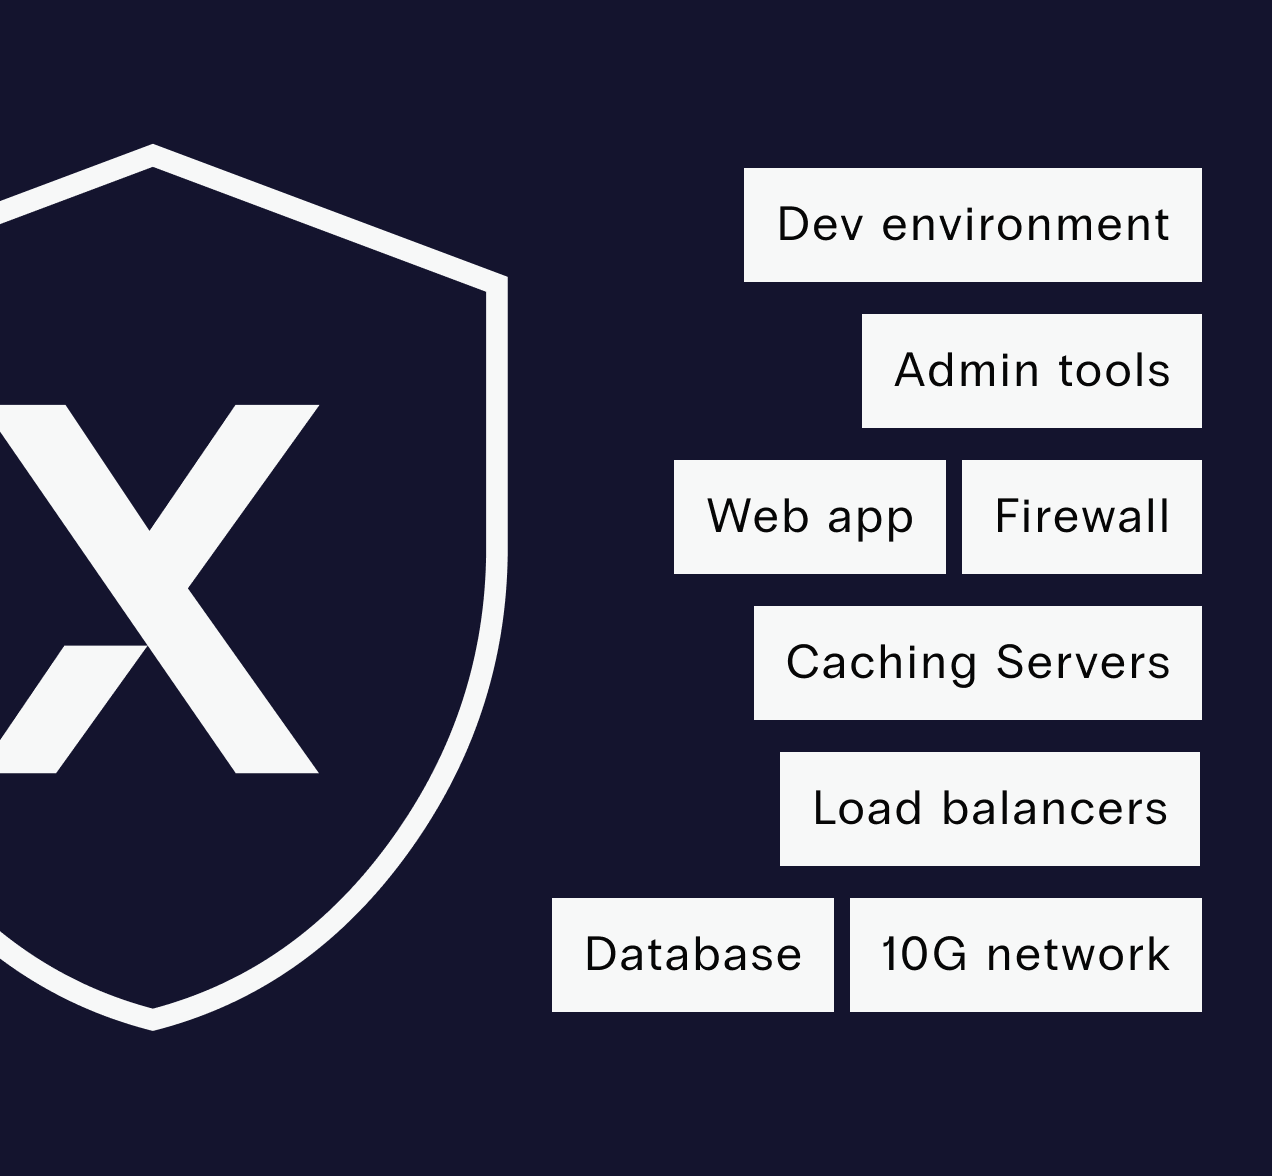 A Nexcess shield shows dev site, admin tools, web app, firewall, caching, load balanced, database, 10G network capabilities